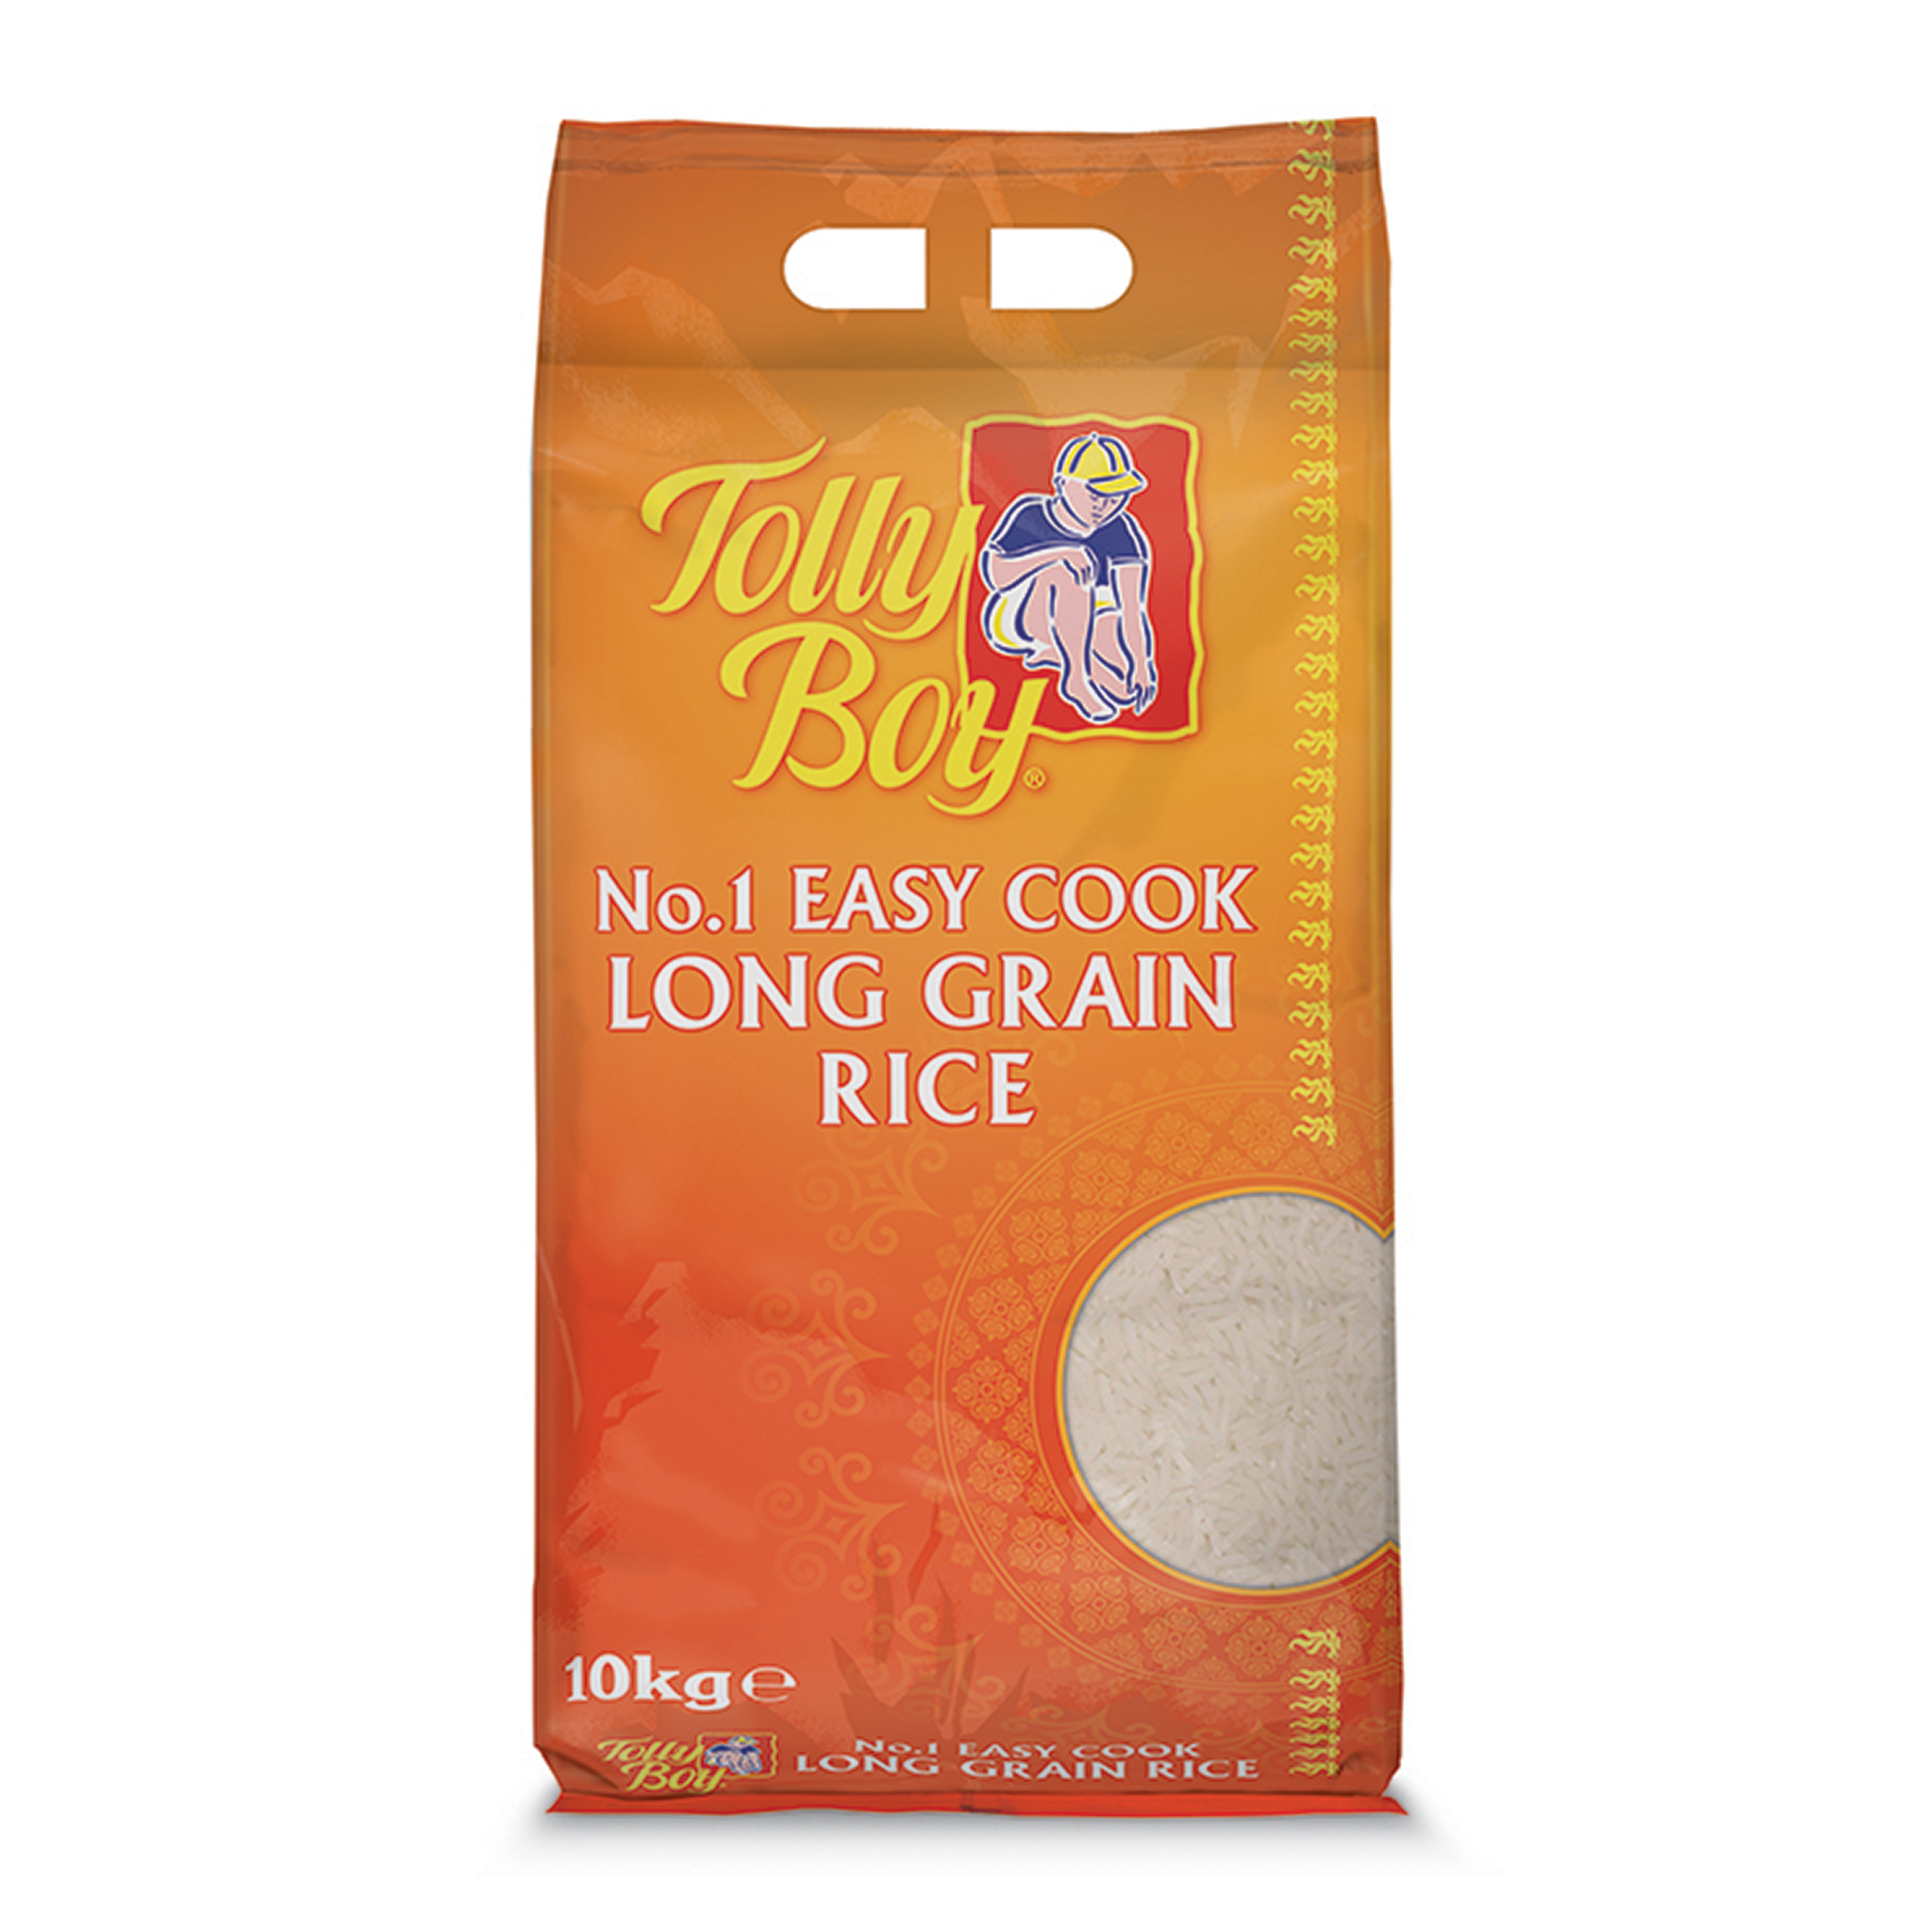 Easy Cook Long Grain White Rice 10kg by Tolly Boy